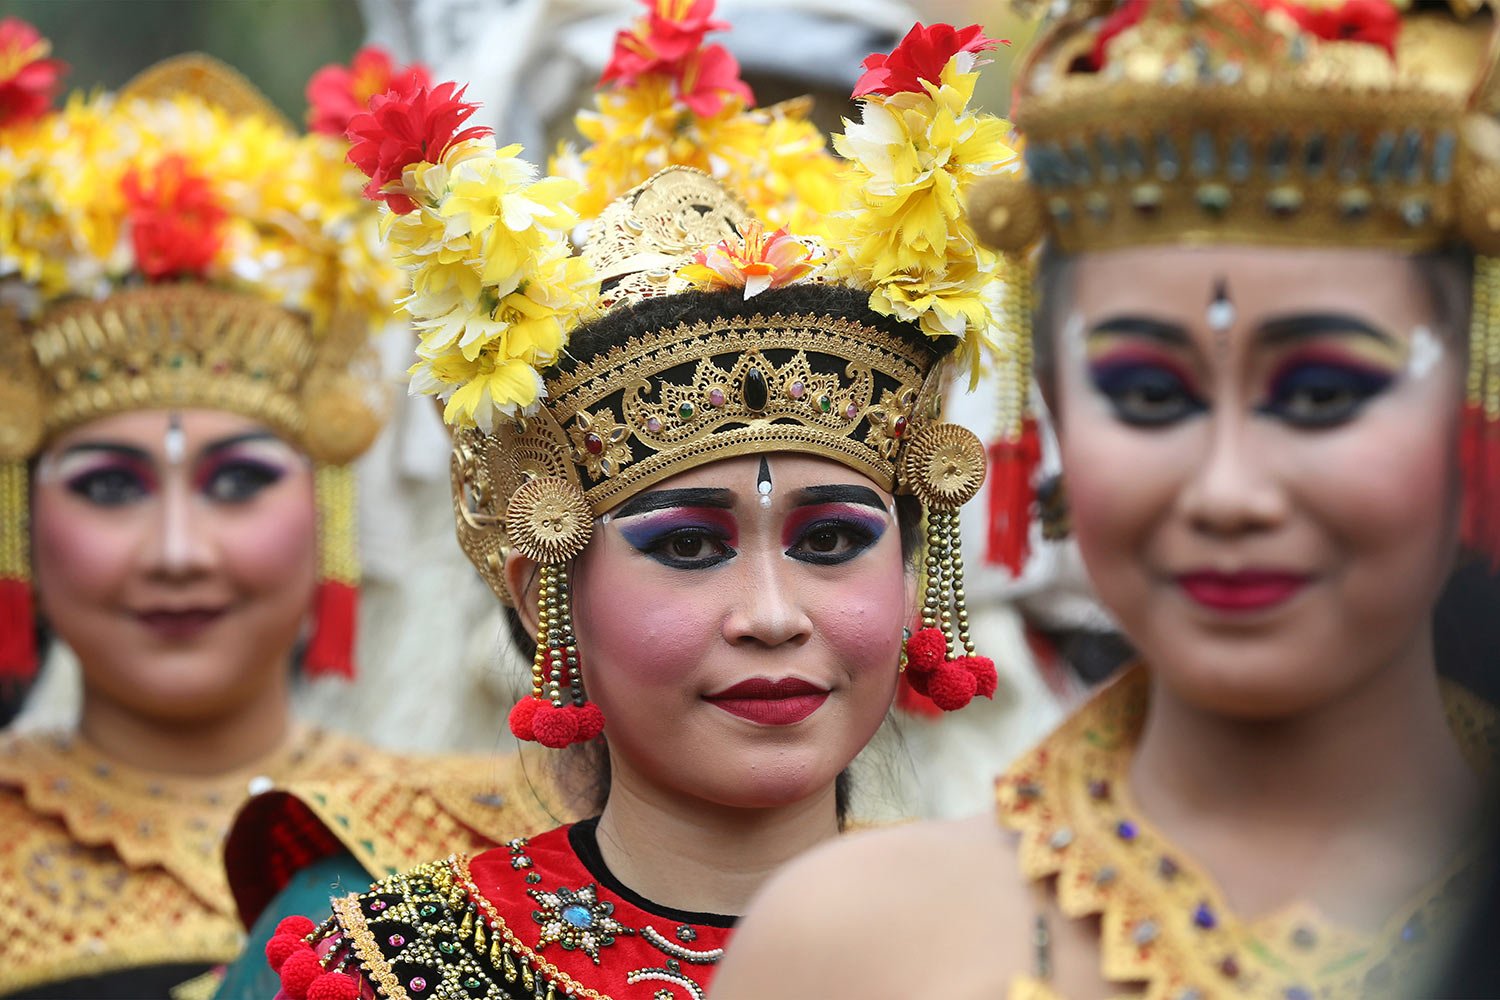  Women in traditional Balinese costume take part in an Independence Day celebration parade in Ubud, Bali, Indonesia on Wednesday, Aug. 17, 2022. (AP Photo/Firdia Lisnawati) 